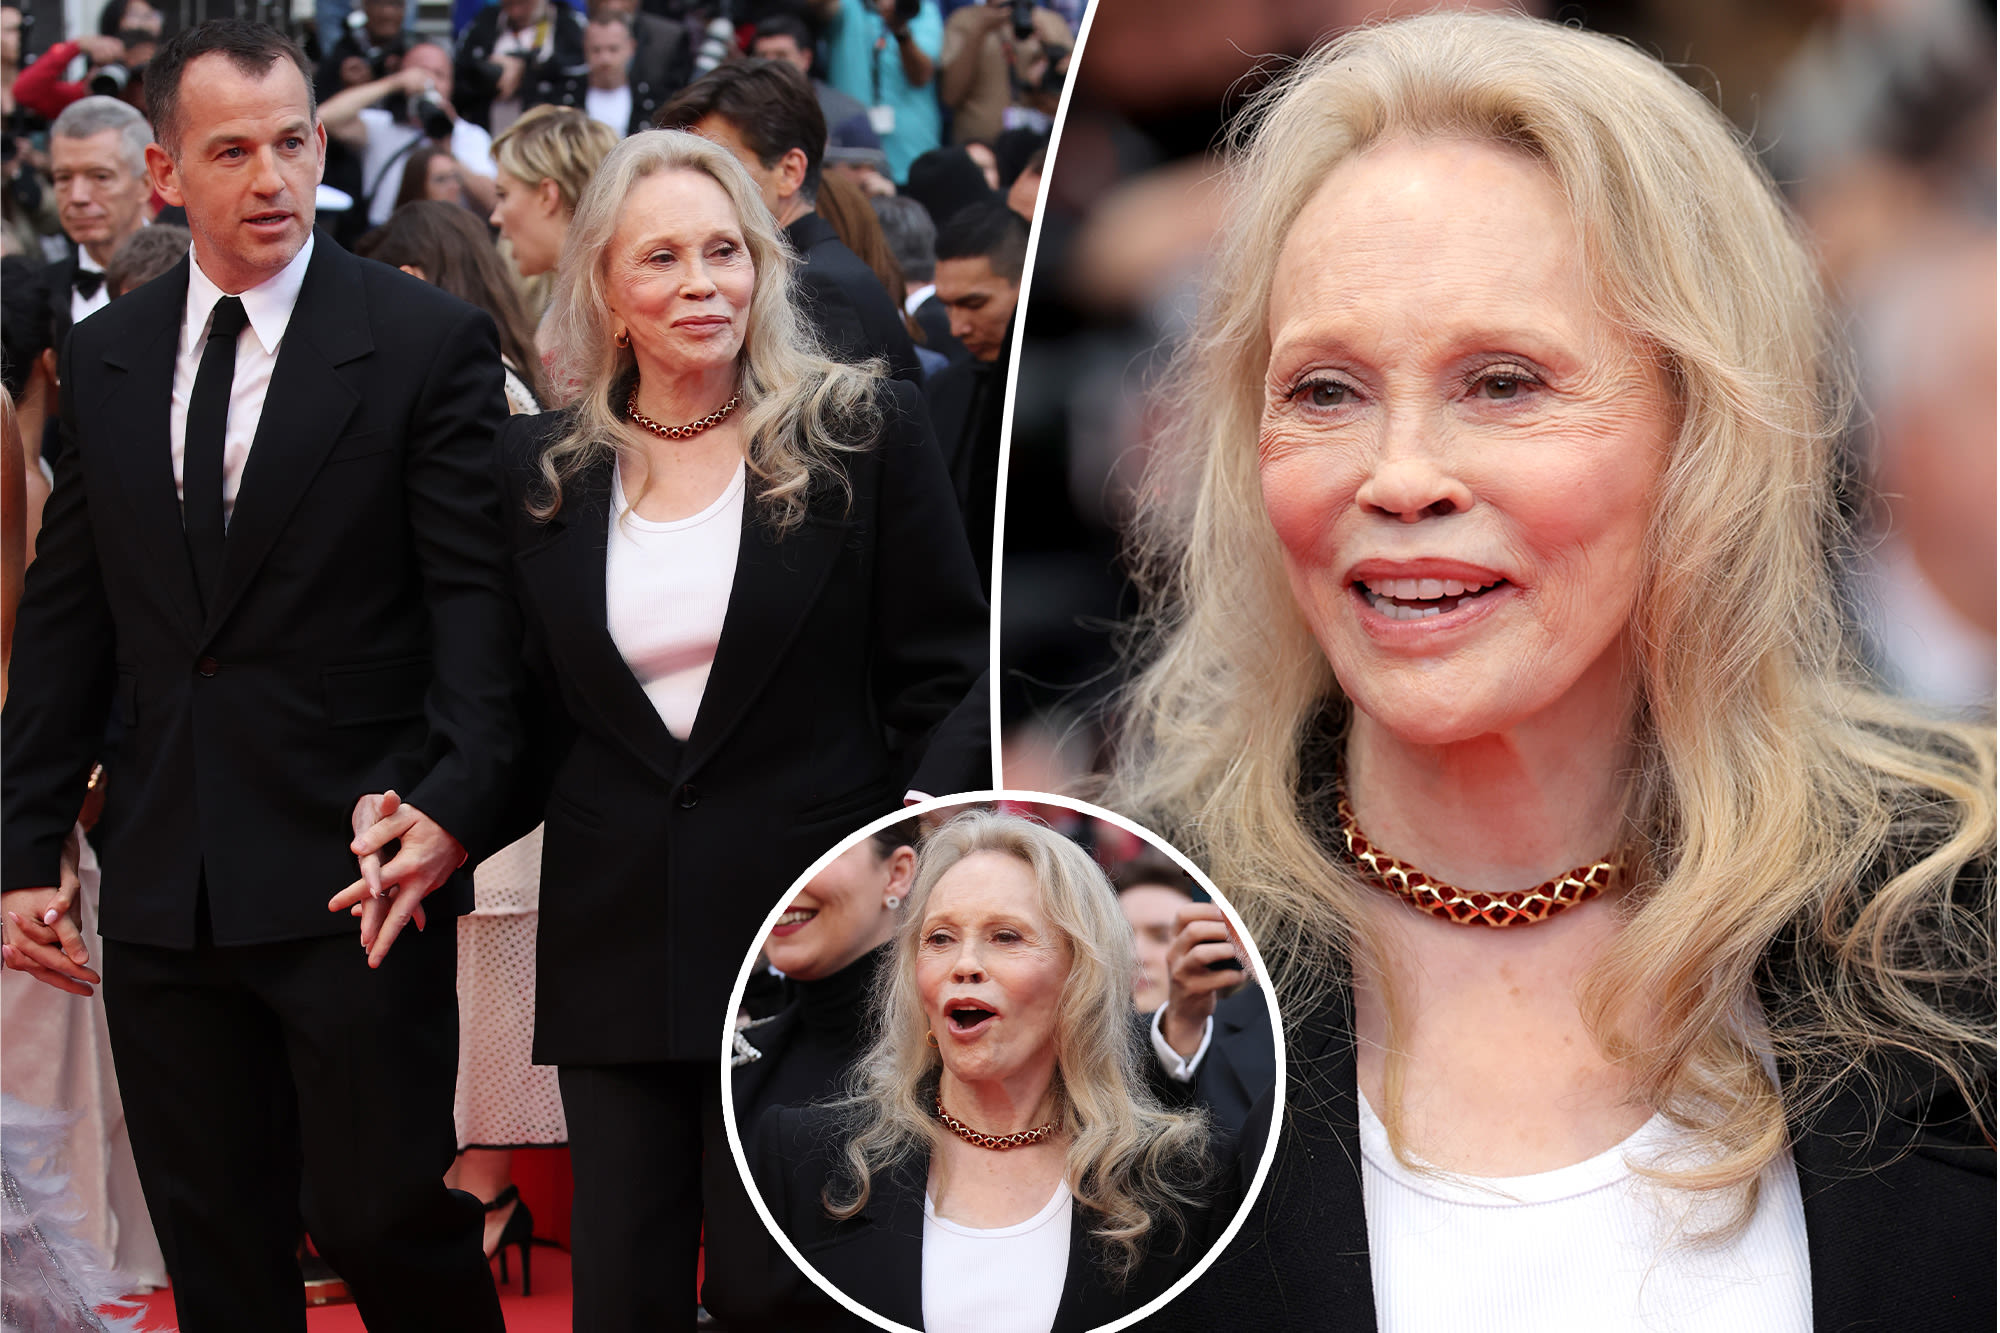 Faye Dunaway, 83, hits first red carpet in years at Cannes Film Festival ahead of doc premiere